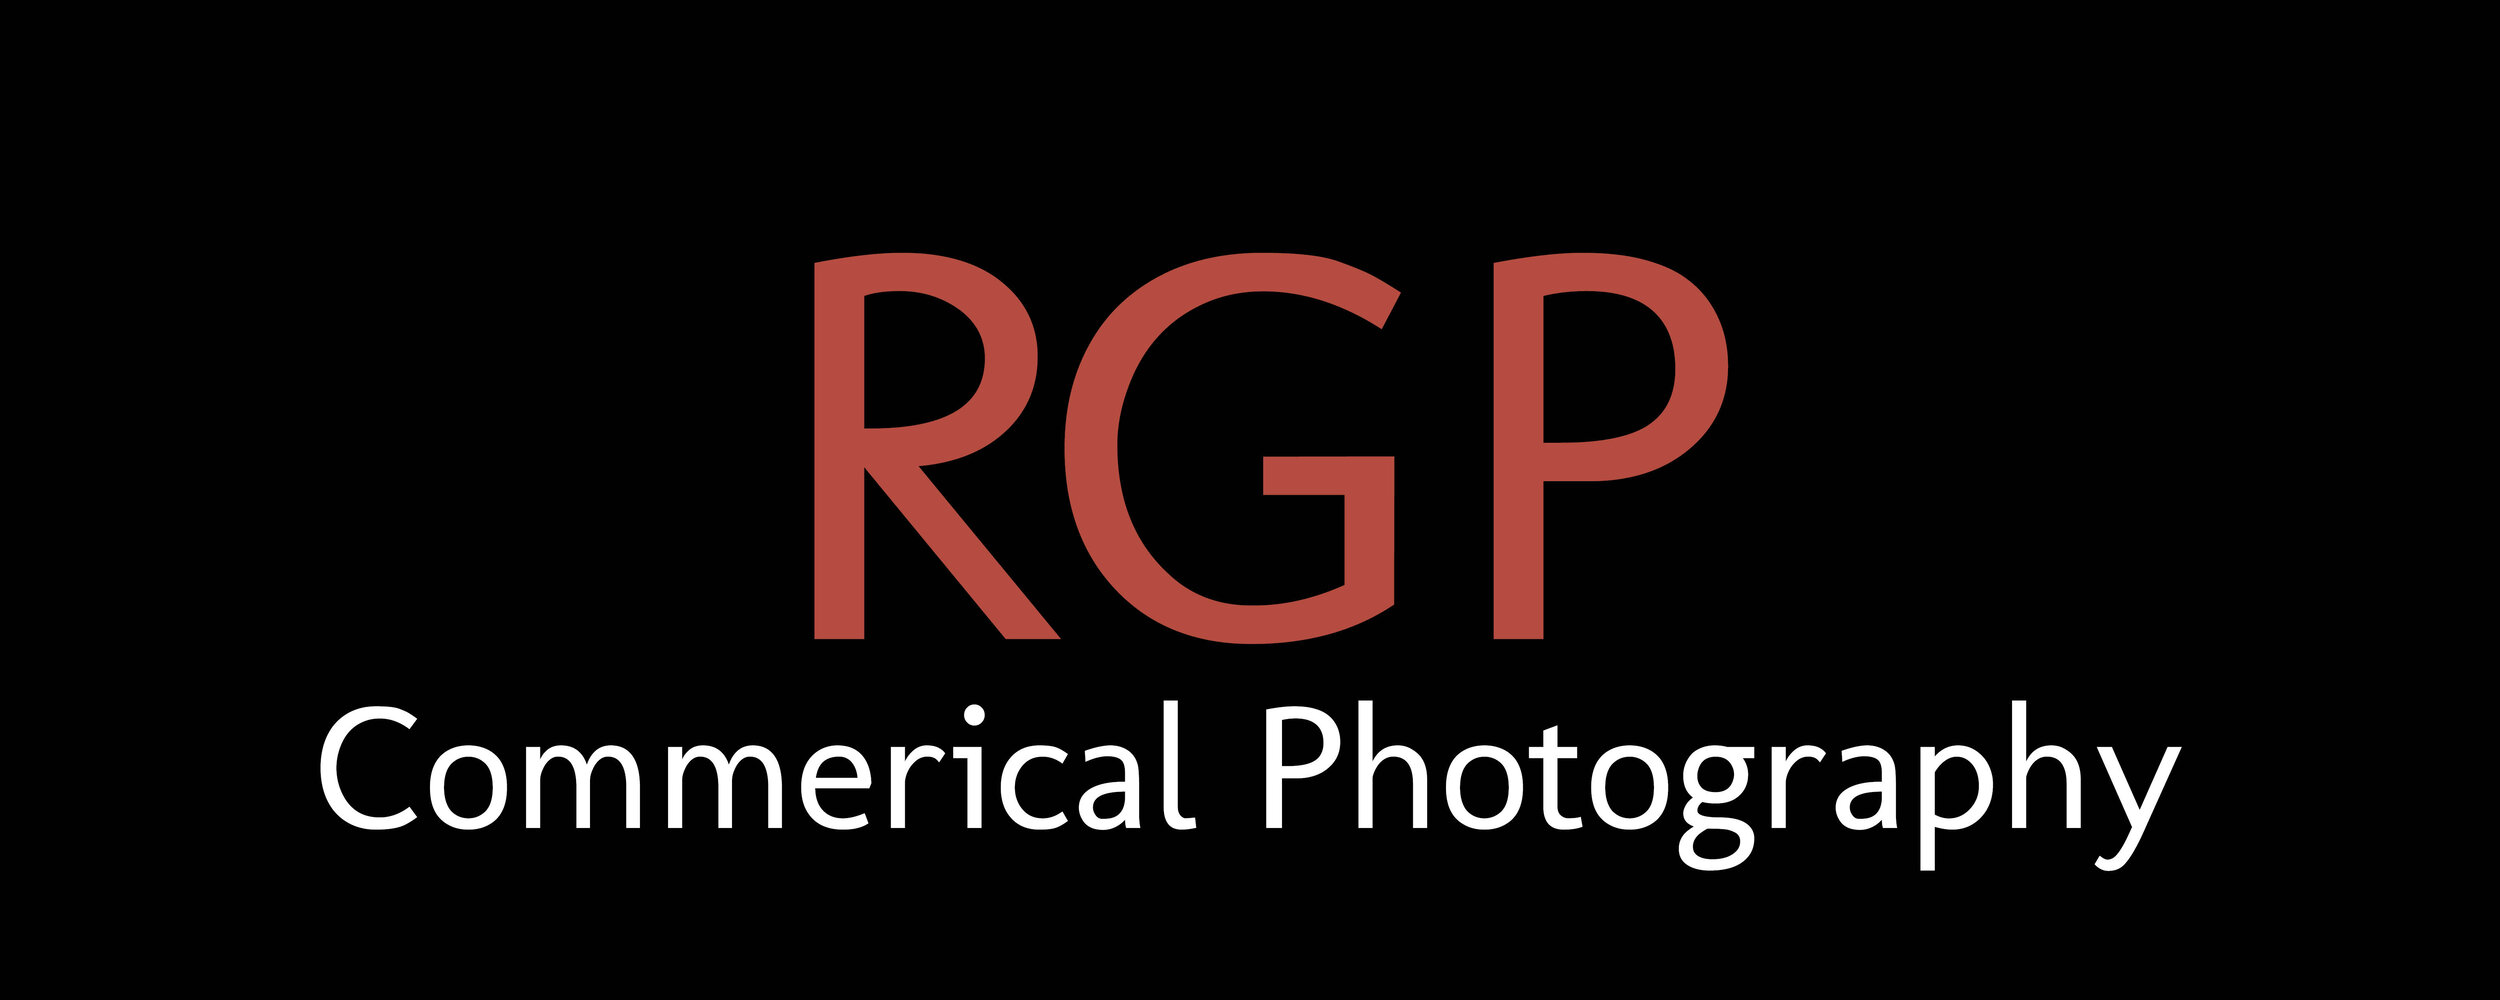 RGP Commerical Photography.jpg